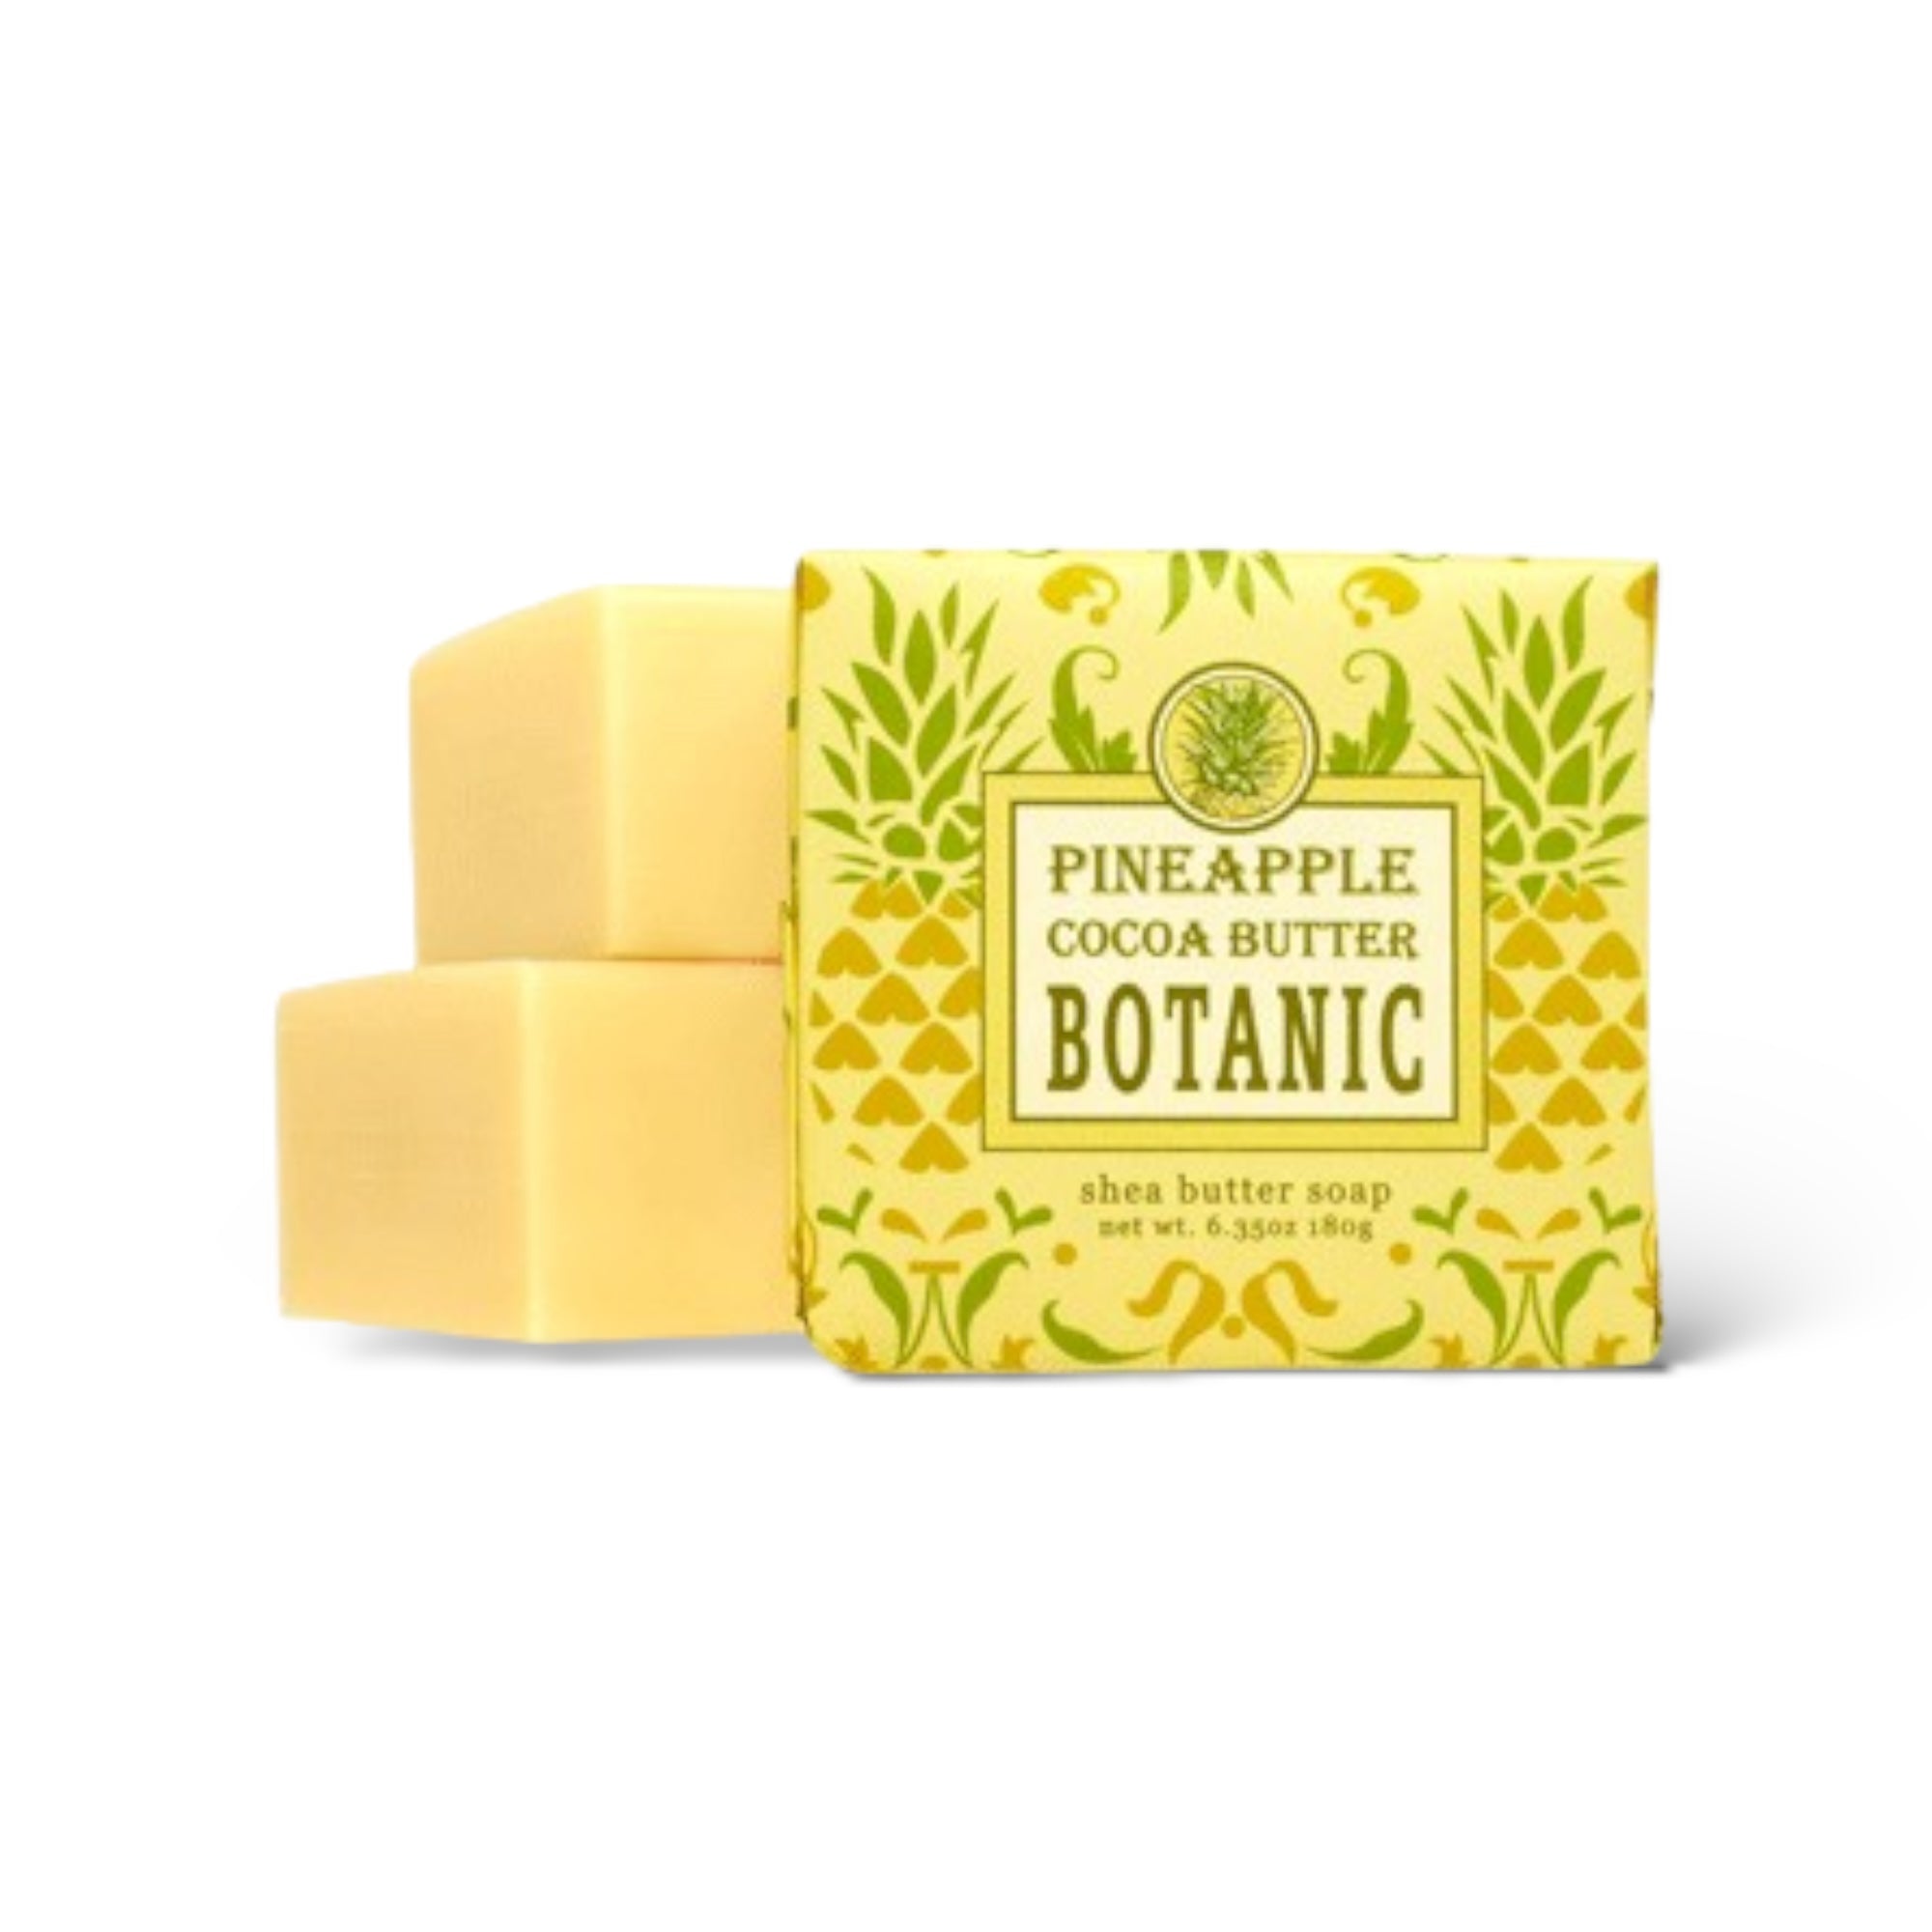 Pineapple Cocoa Butter Botanic Shea Butter Soap by Greenwich Bay Trading Co.